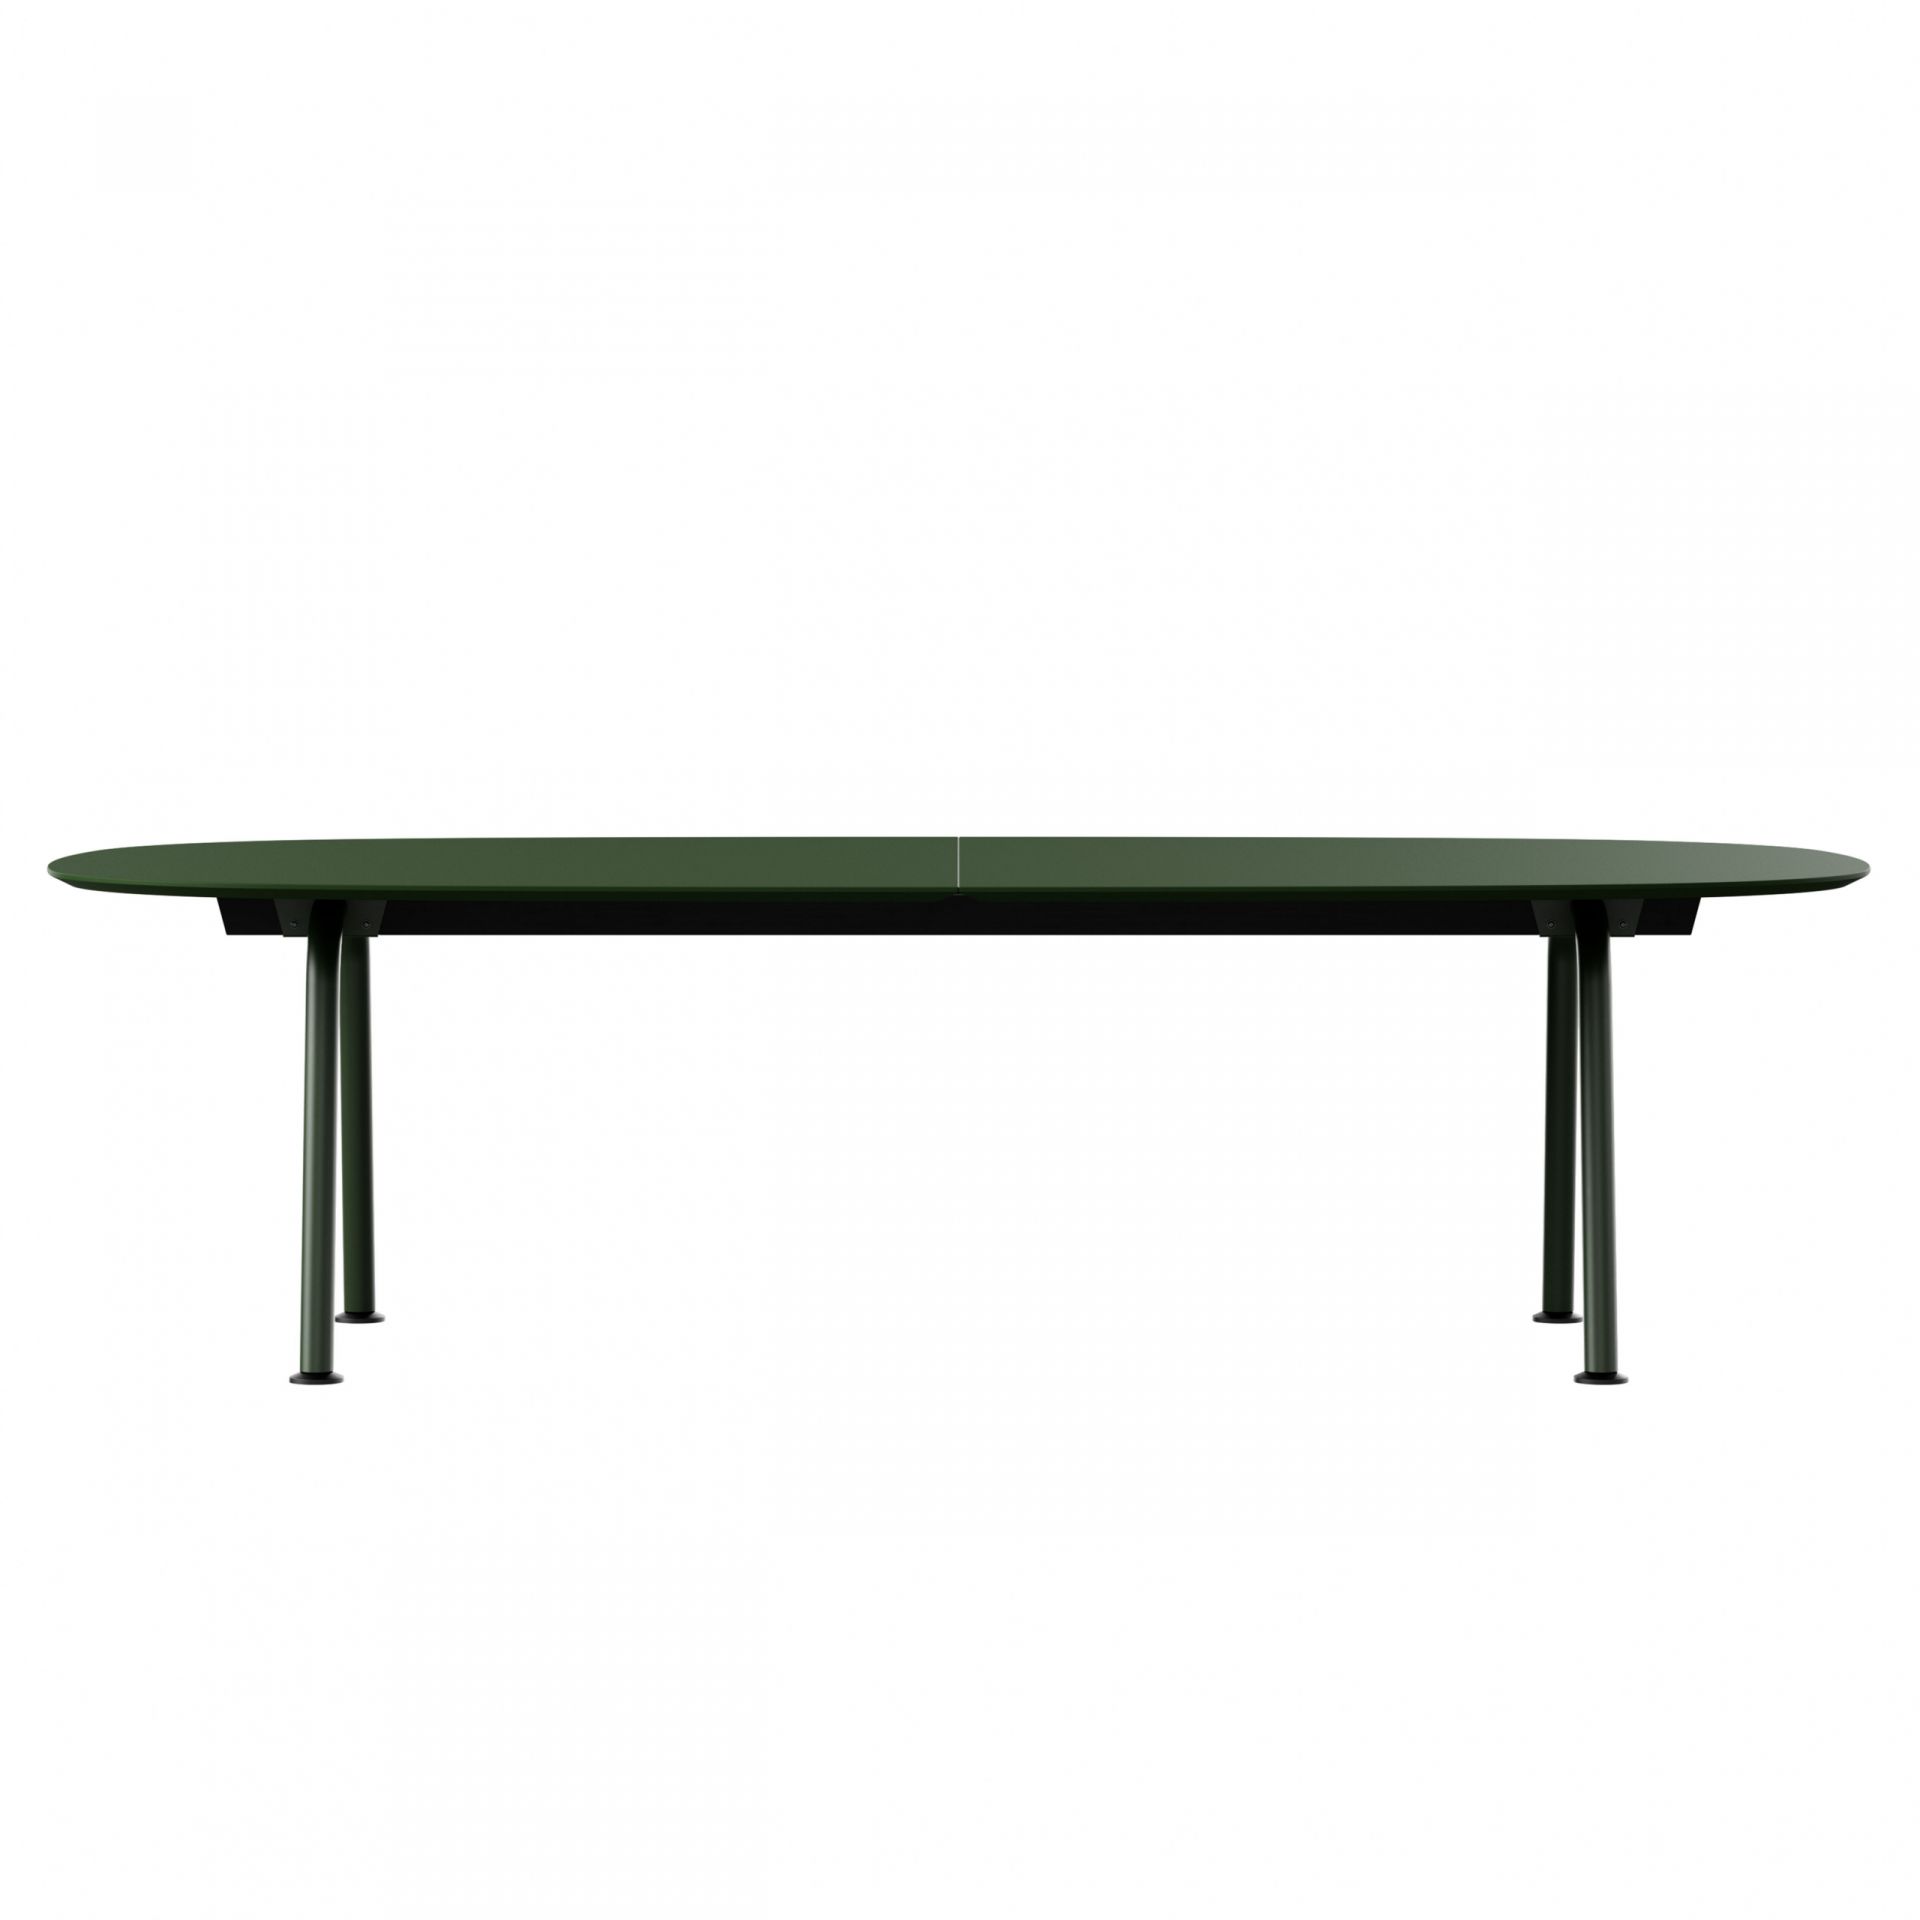 Continue Meeting table product image 8